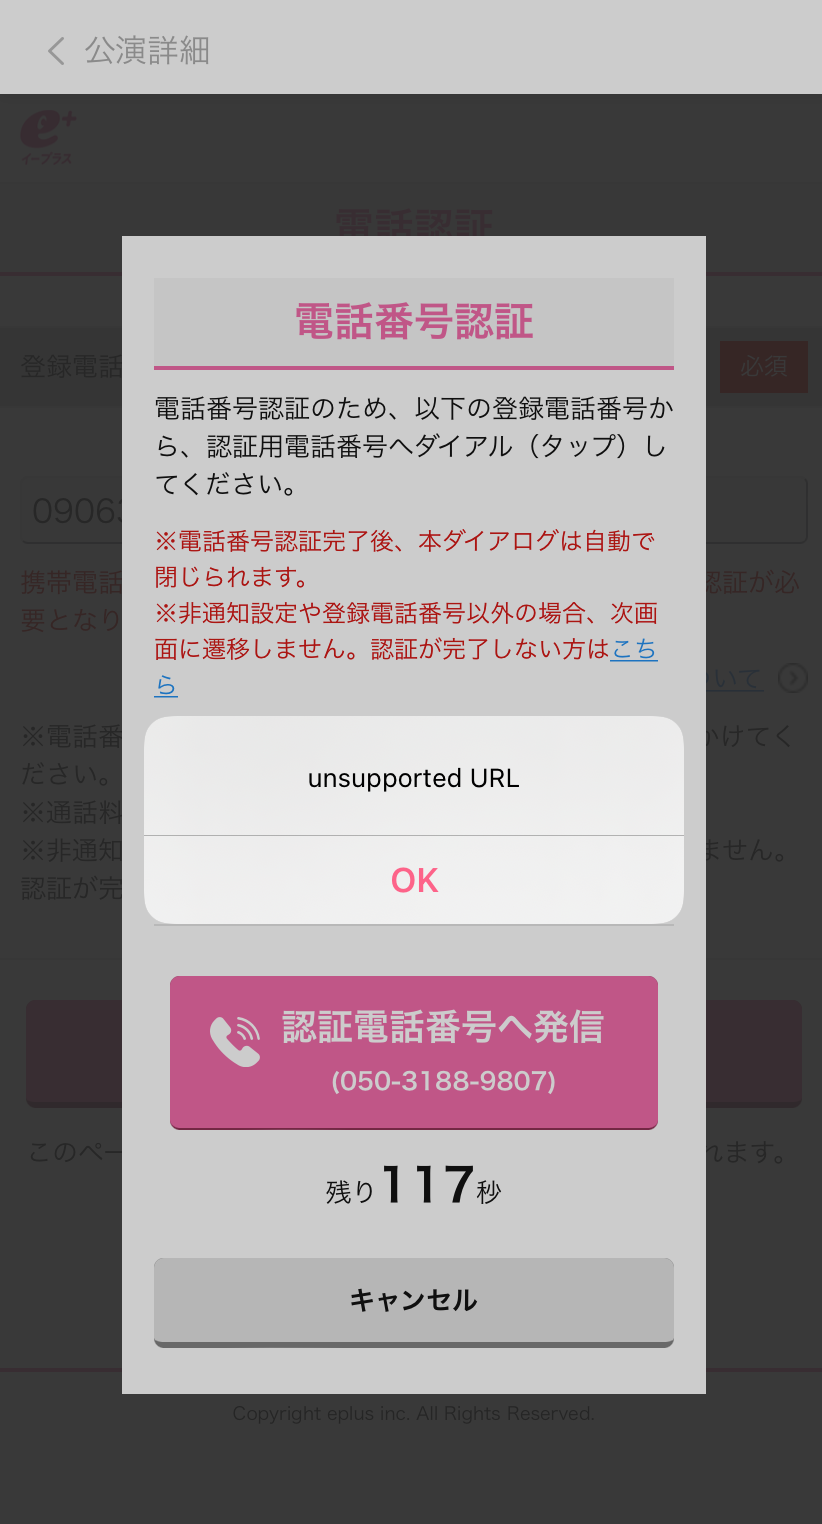 unsupported URL_モーダル全体.PNG